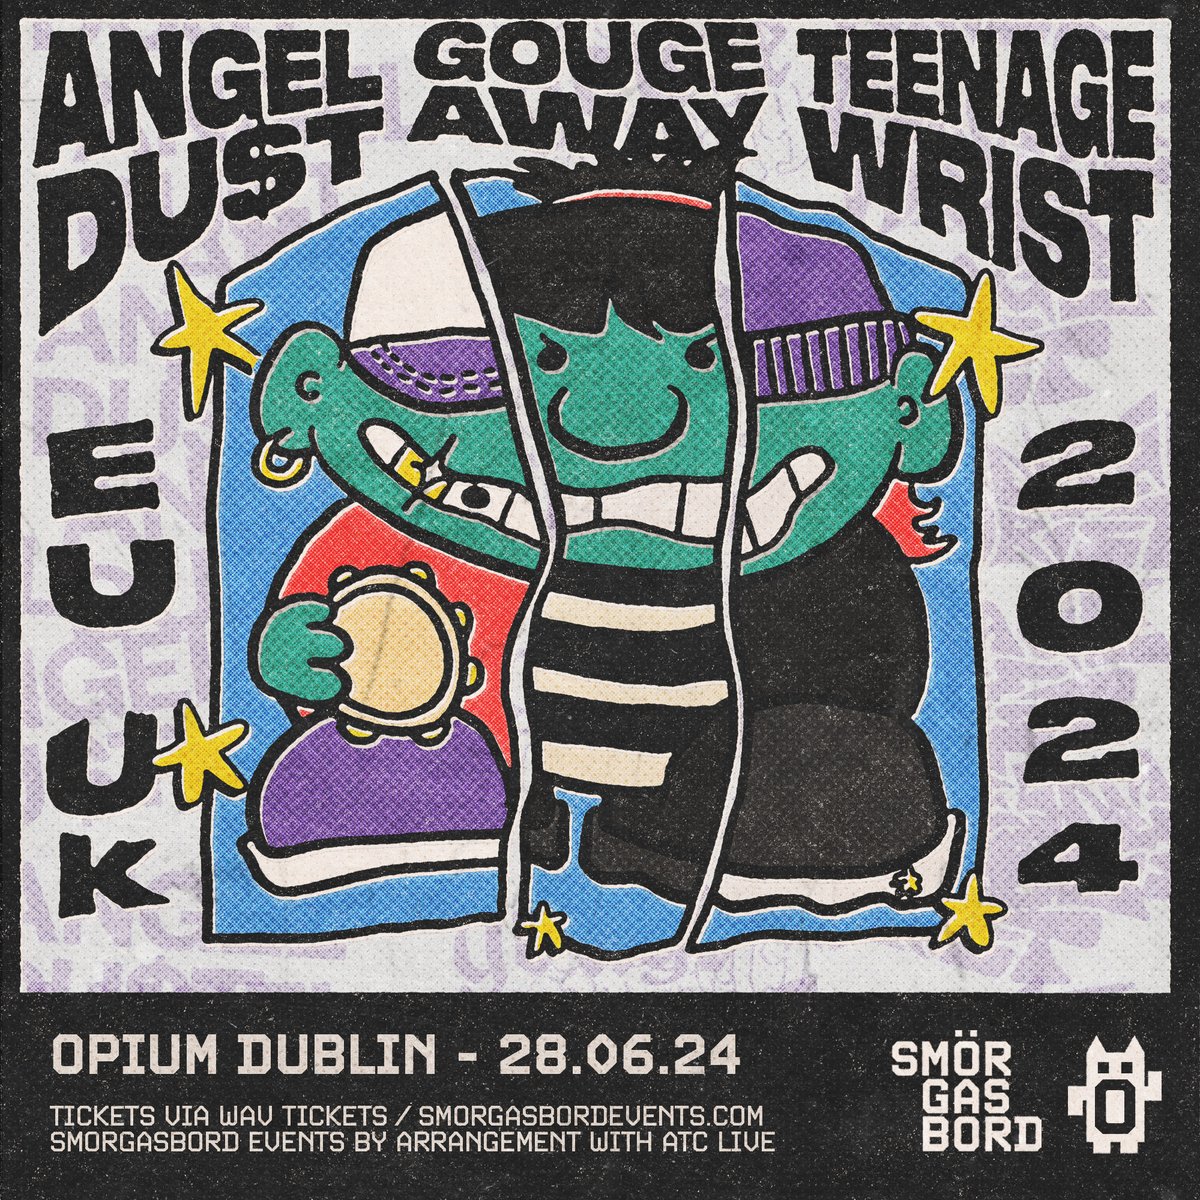 We are absolutely stoked to announce this triple threat of (post) hardcore excellence - @angeldustmoney , @TeenageWrist & @gougeawayfl appearing together at Opium Live, Dublin on Friday 28th June. See you in the pit! opium.ie/events/angel-d… #smorgasbordevents @whelanslive